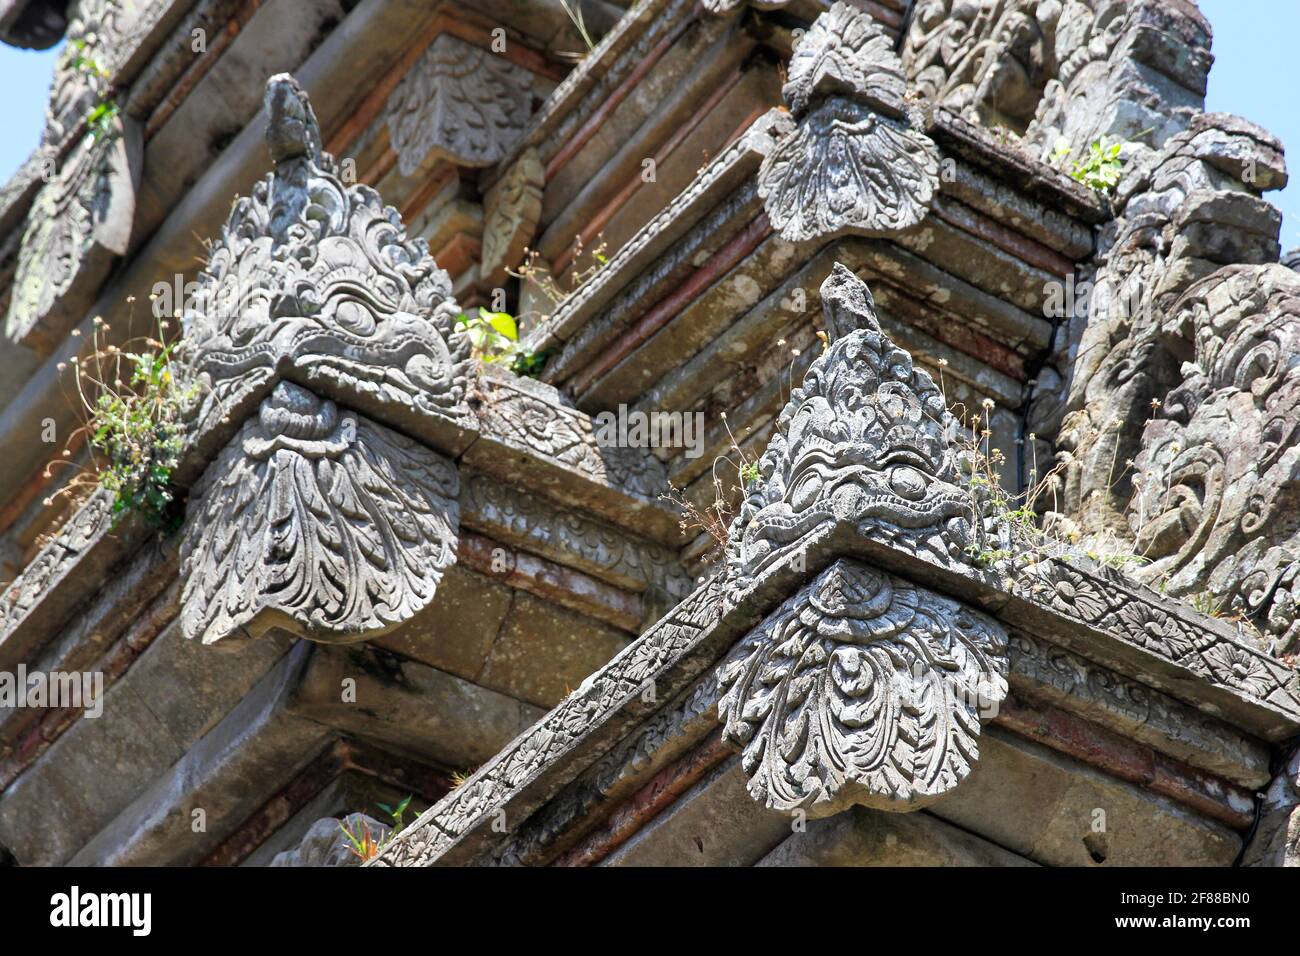 Traditional stone carvings of faces on roof of building in Bali, Indonesia Stock Photo